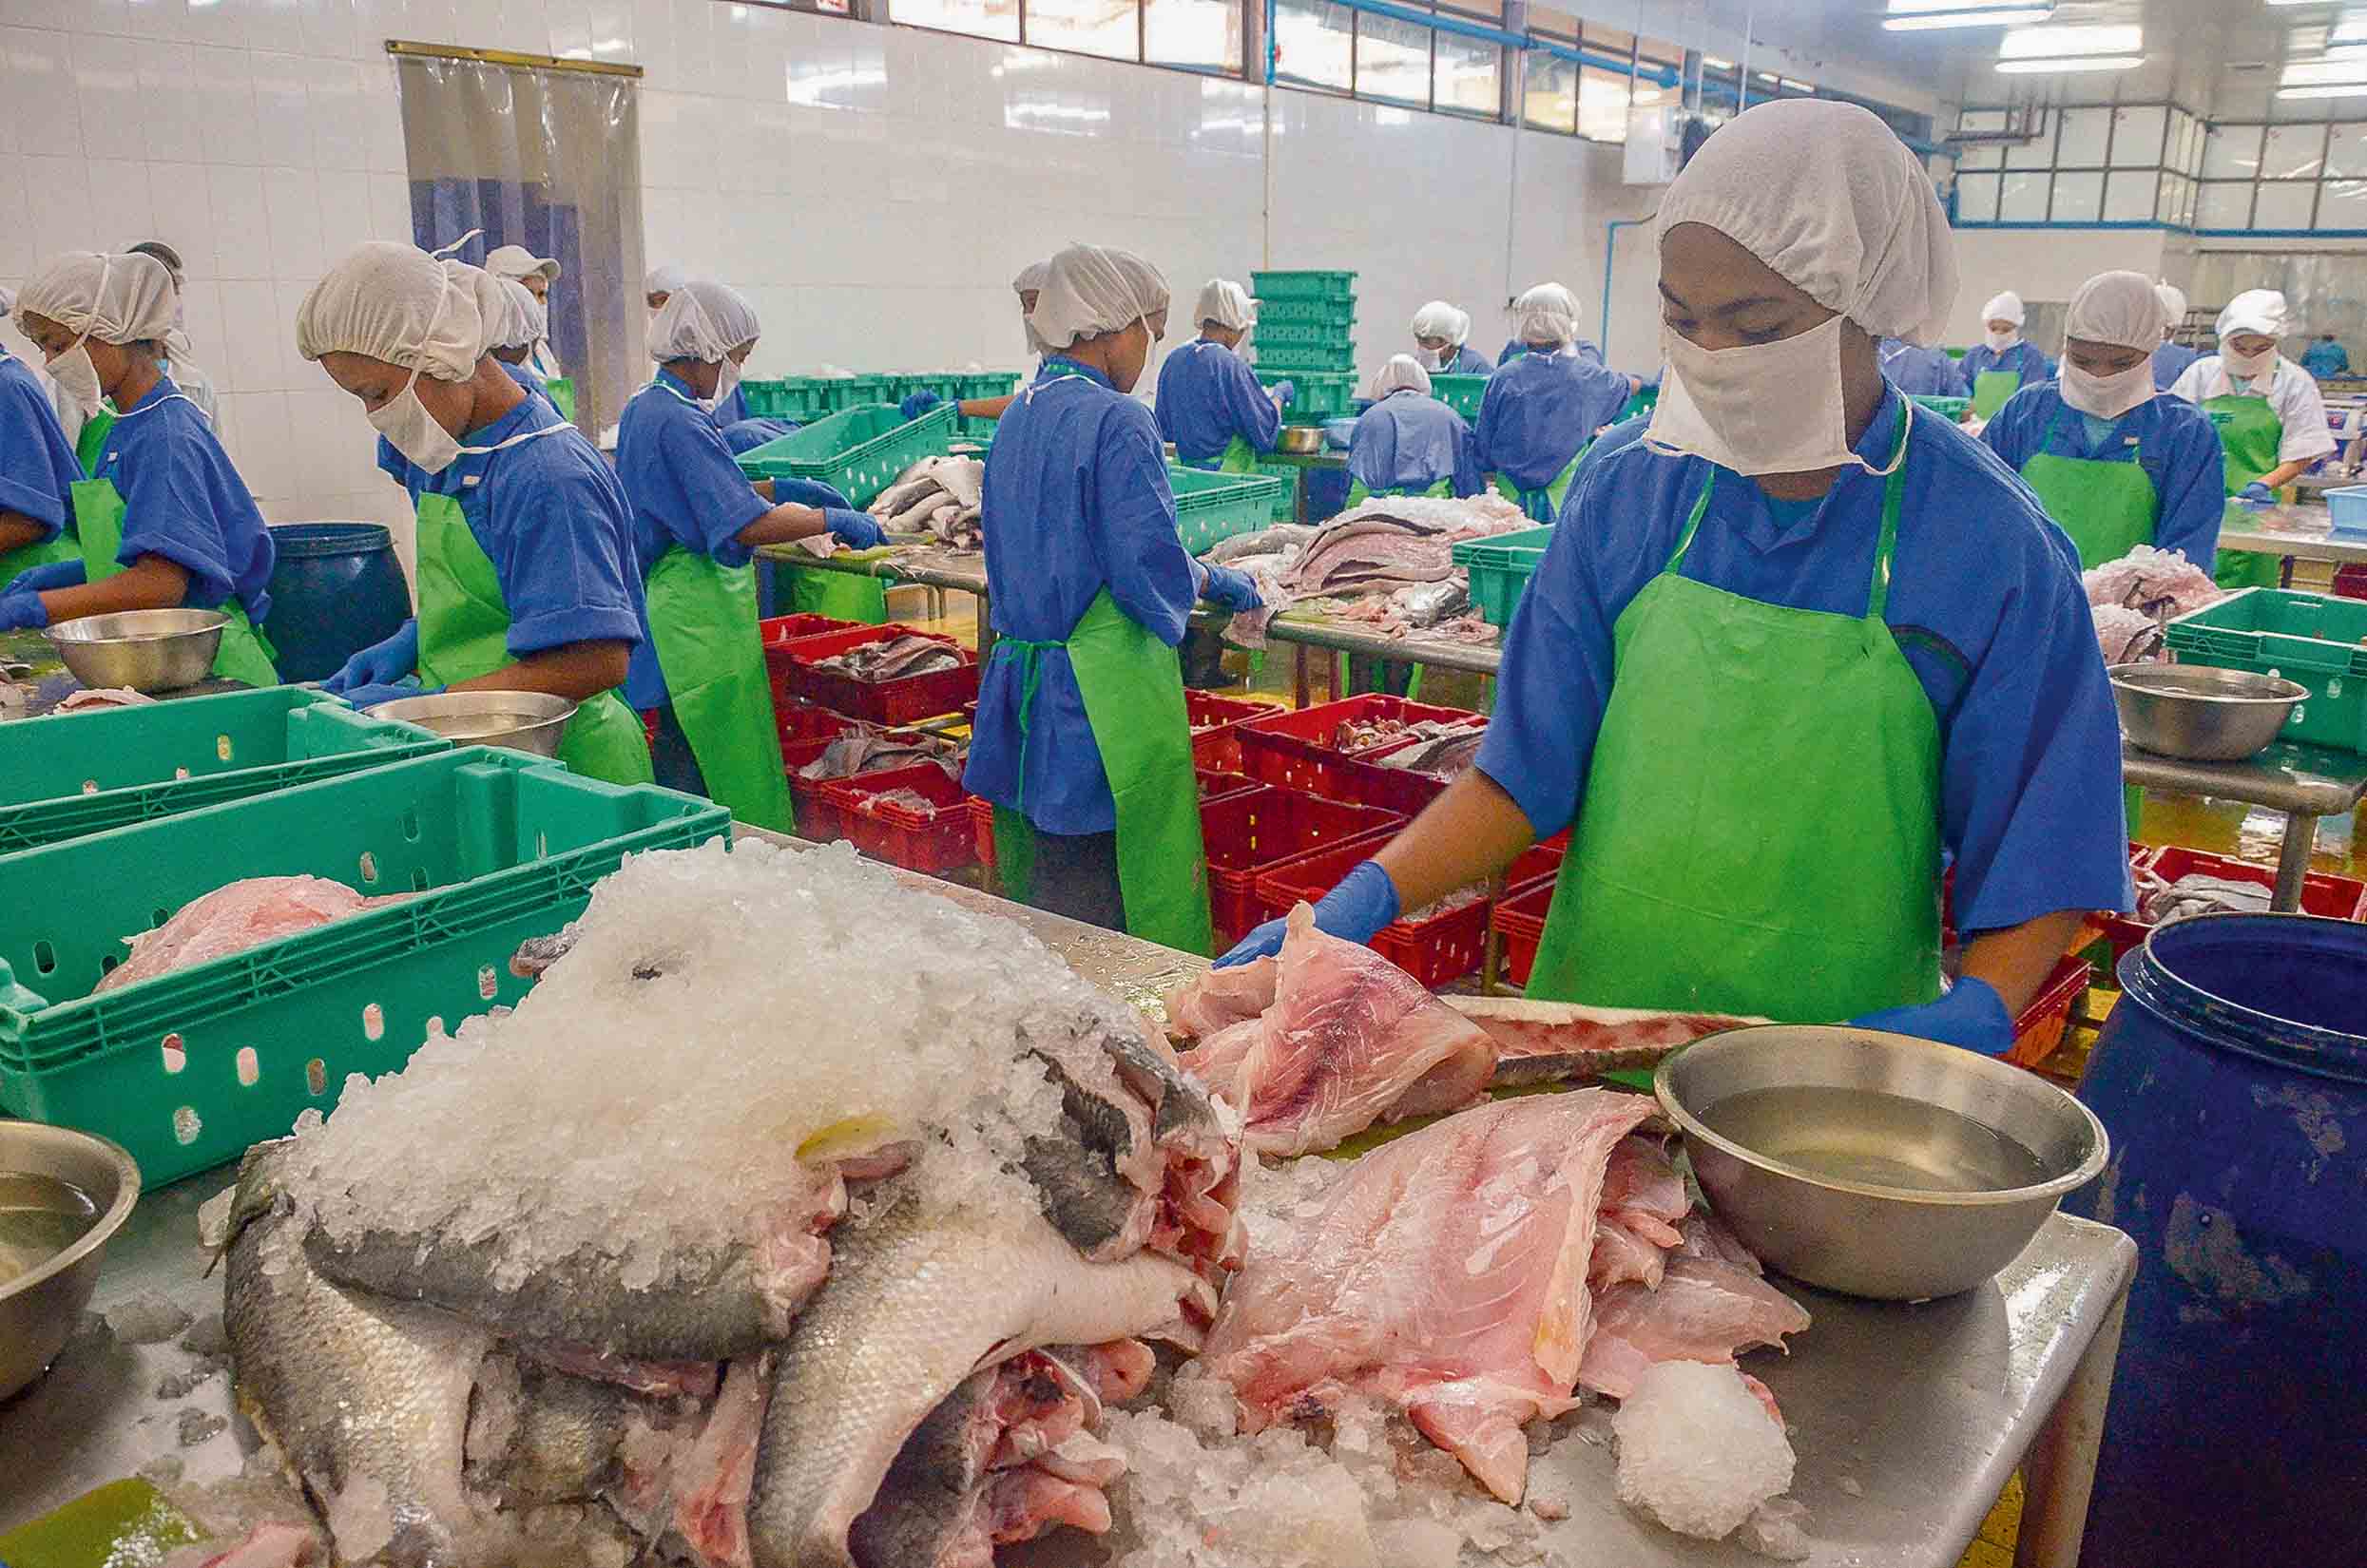 The exports earnings from the fisheries sectors reached over USSD $ 700 million in the 2019 – 2020 fiscal year 